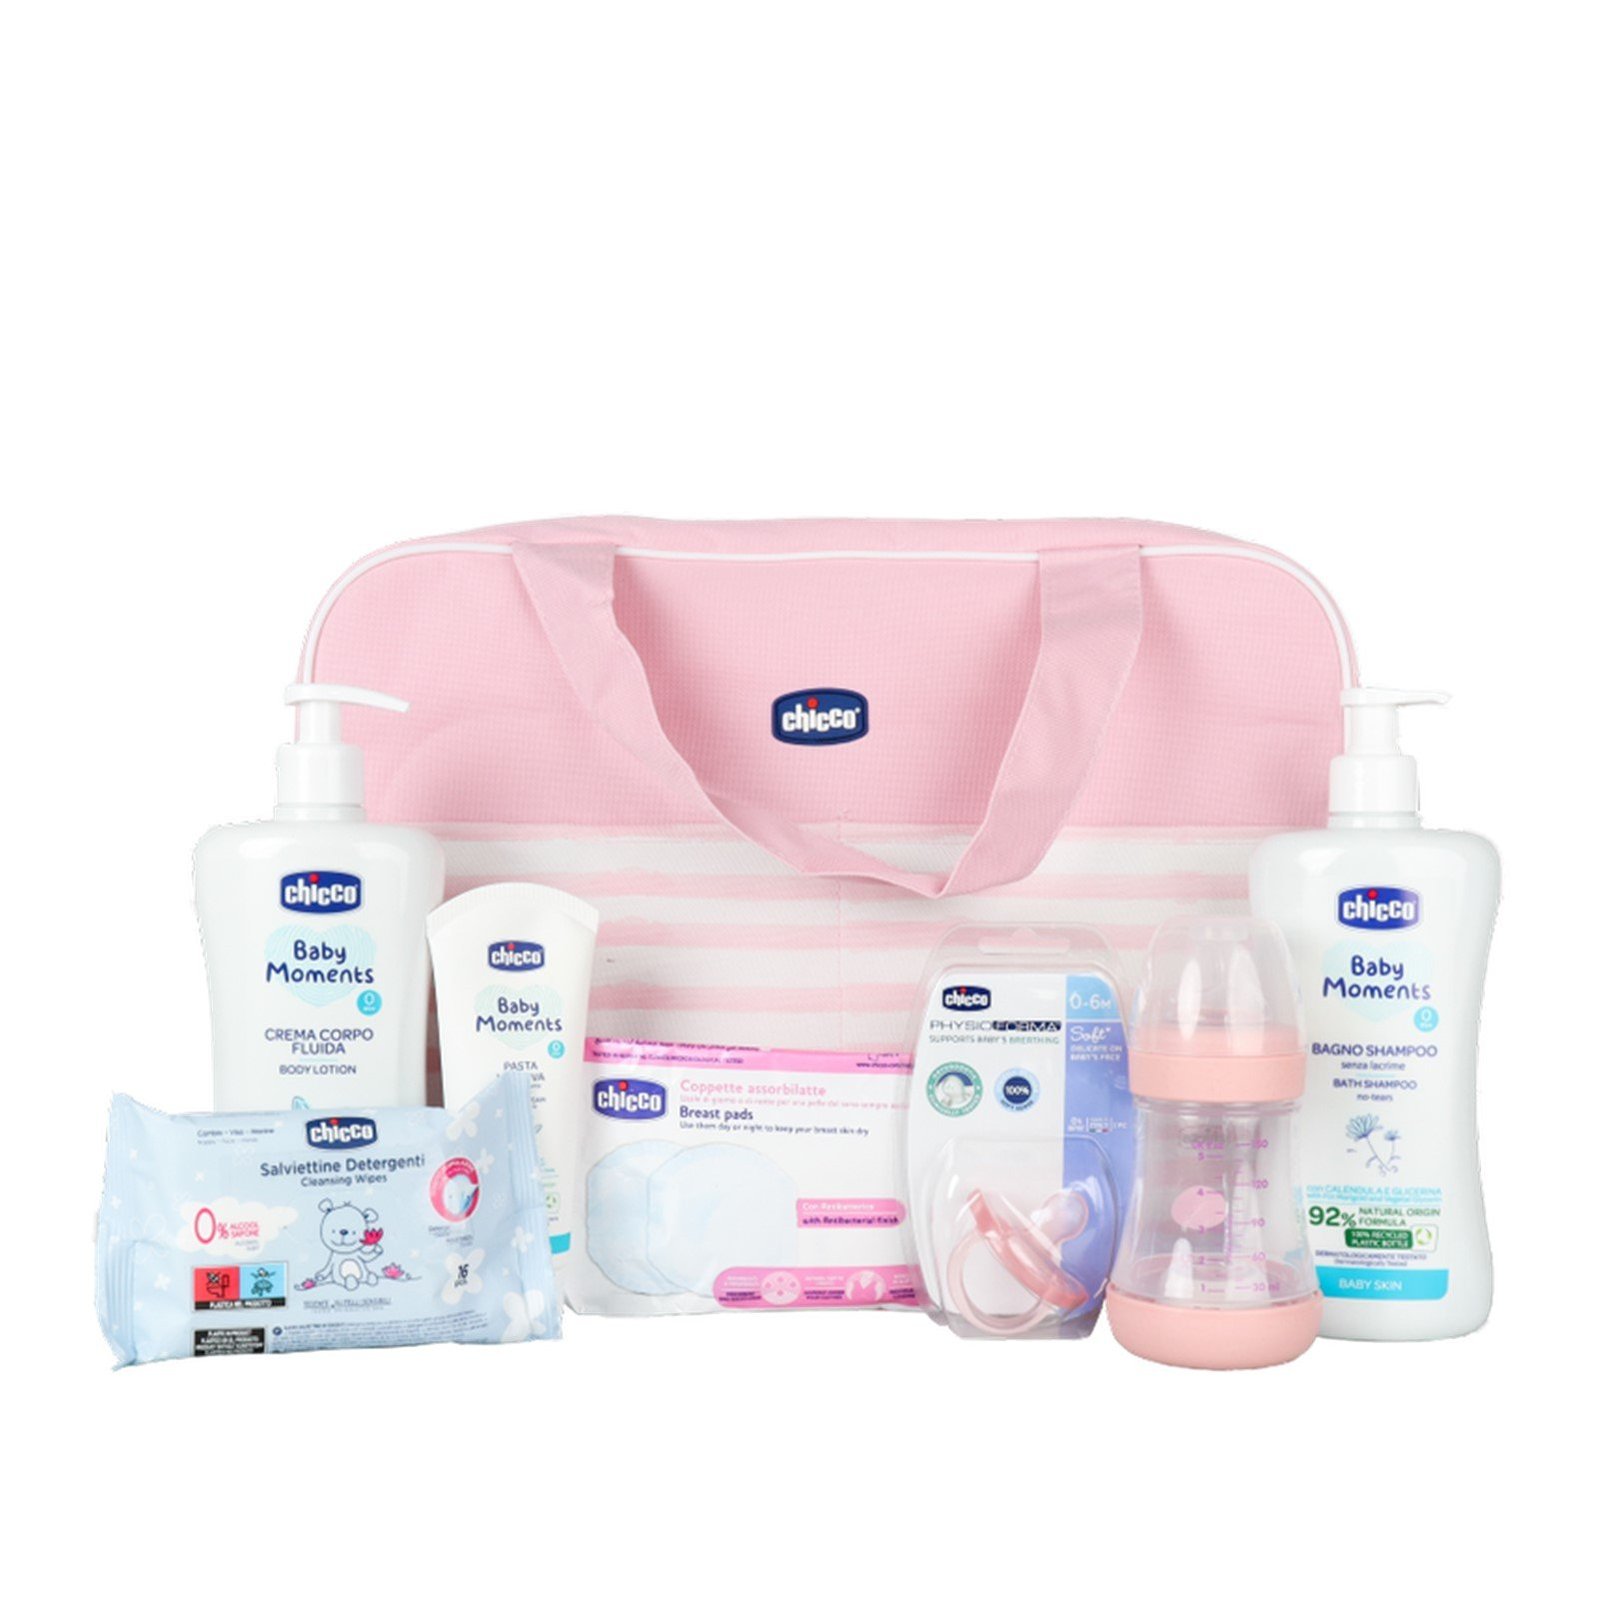 https://static.beautytocare.com/cdn-cgi/image/width=1600,height=1600,f=auto/media/catalog/product//c/h/chicco-baby-moments-maternity-bag-pink.jpg